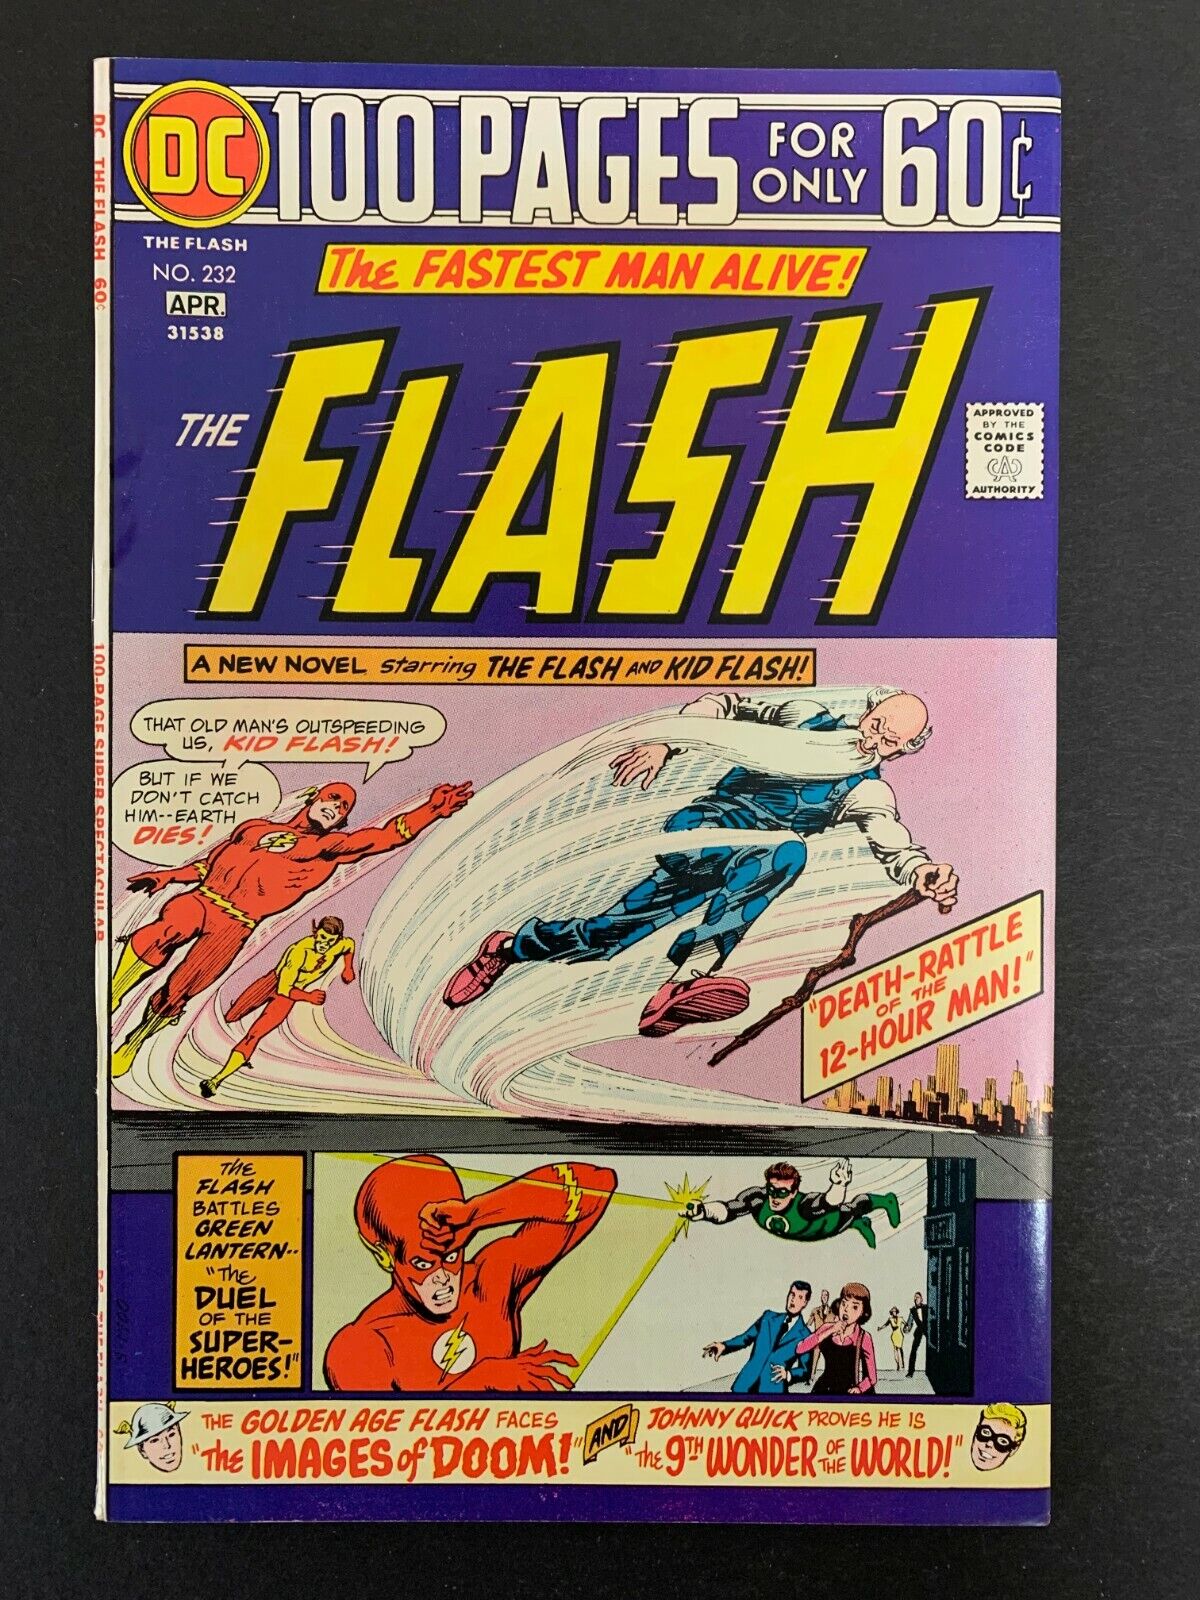 FLASH #232 *HIGH GRADE* (DC, 1974)  100 PAGE GIANT  LOTS OF PICS